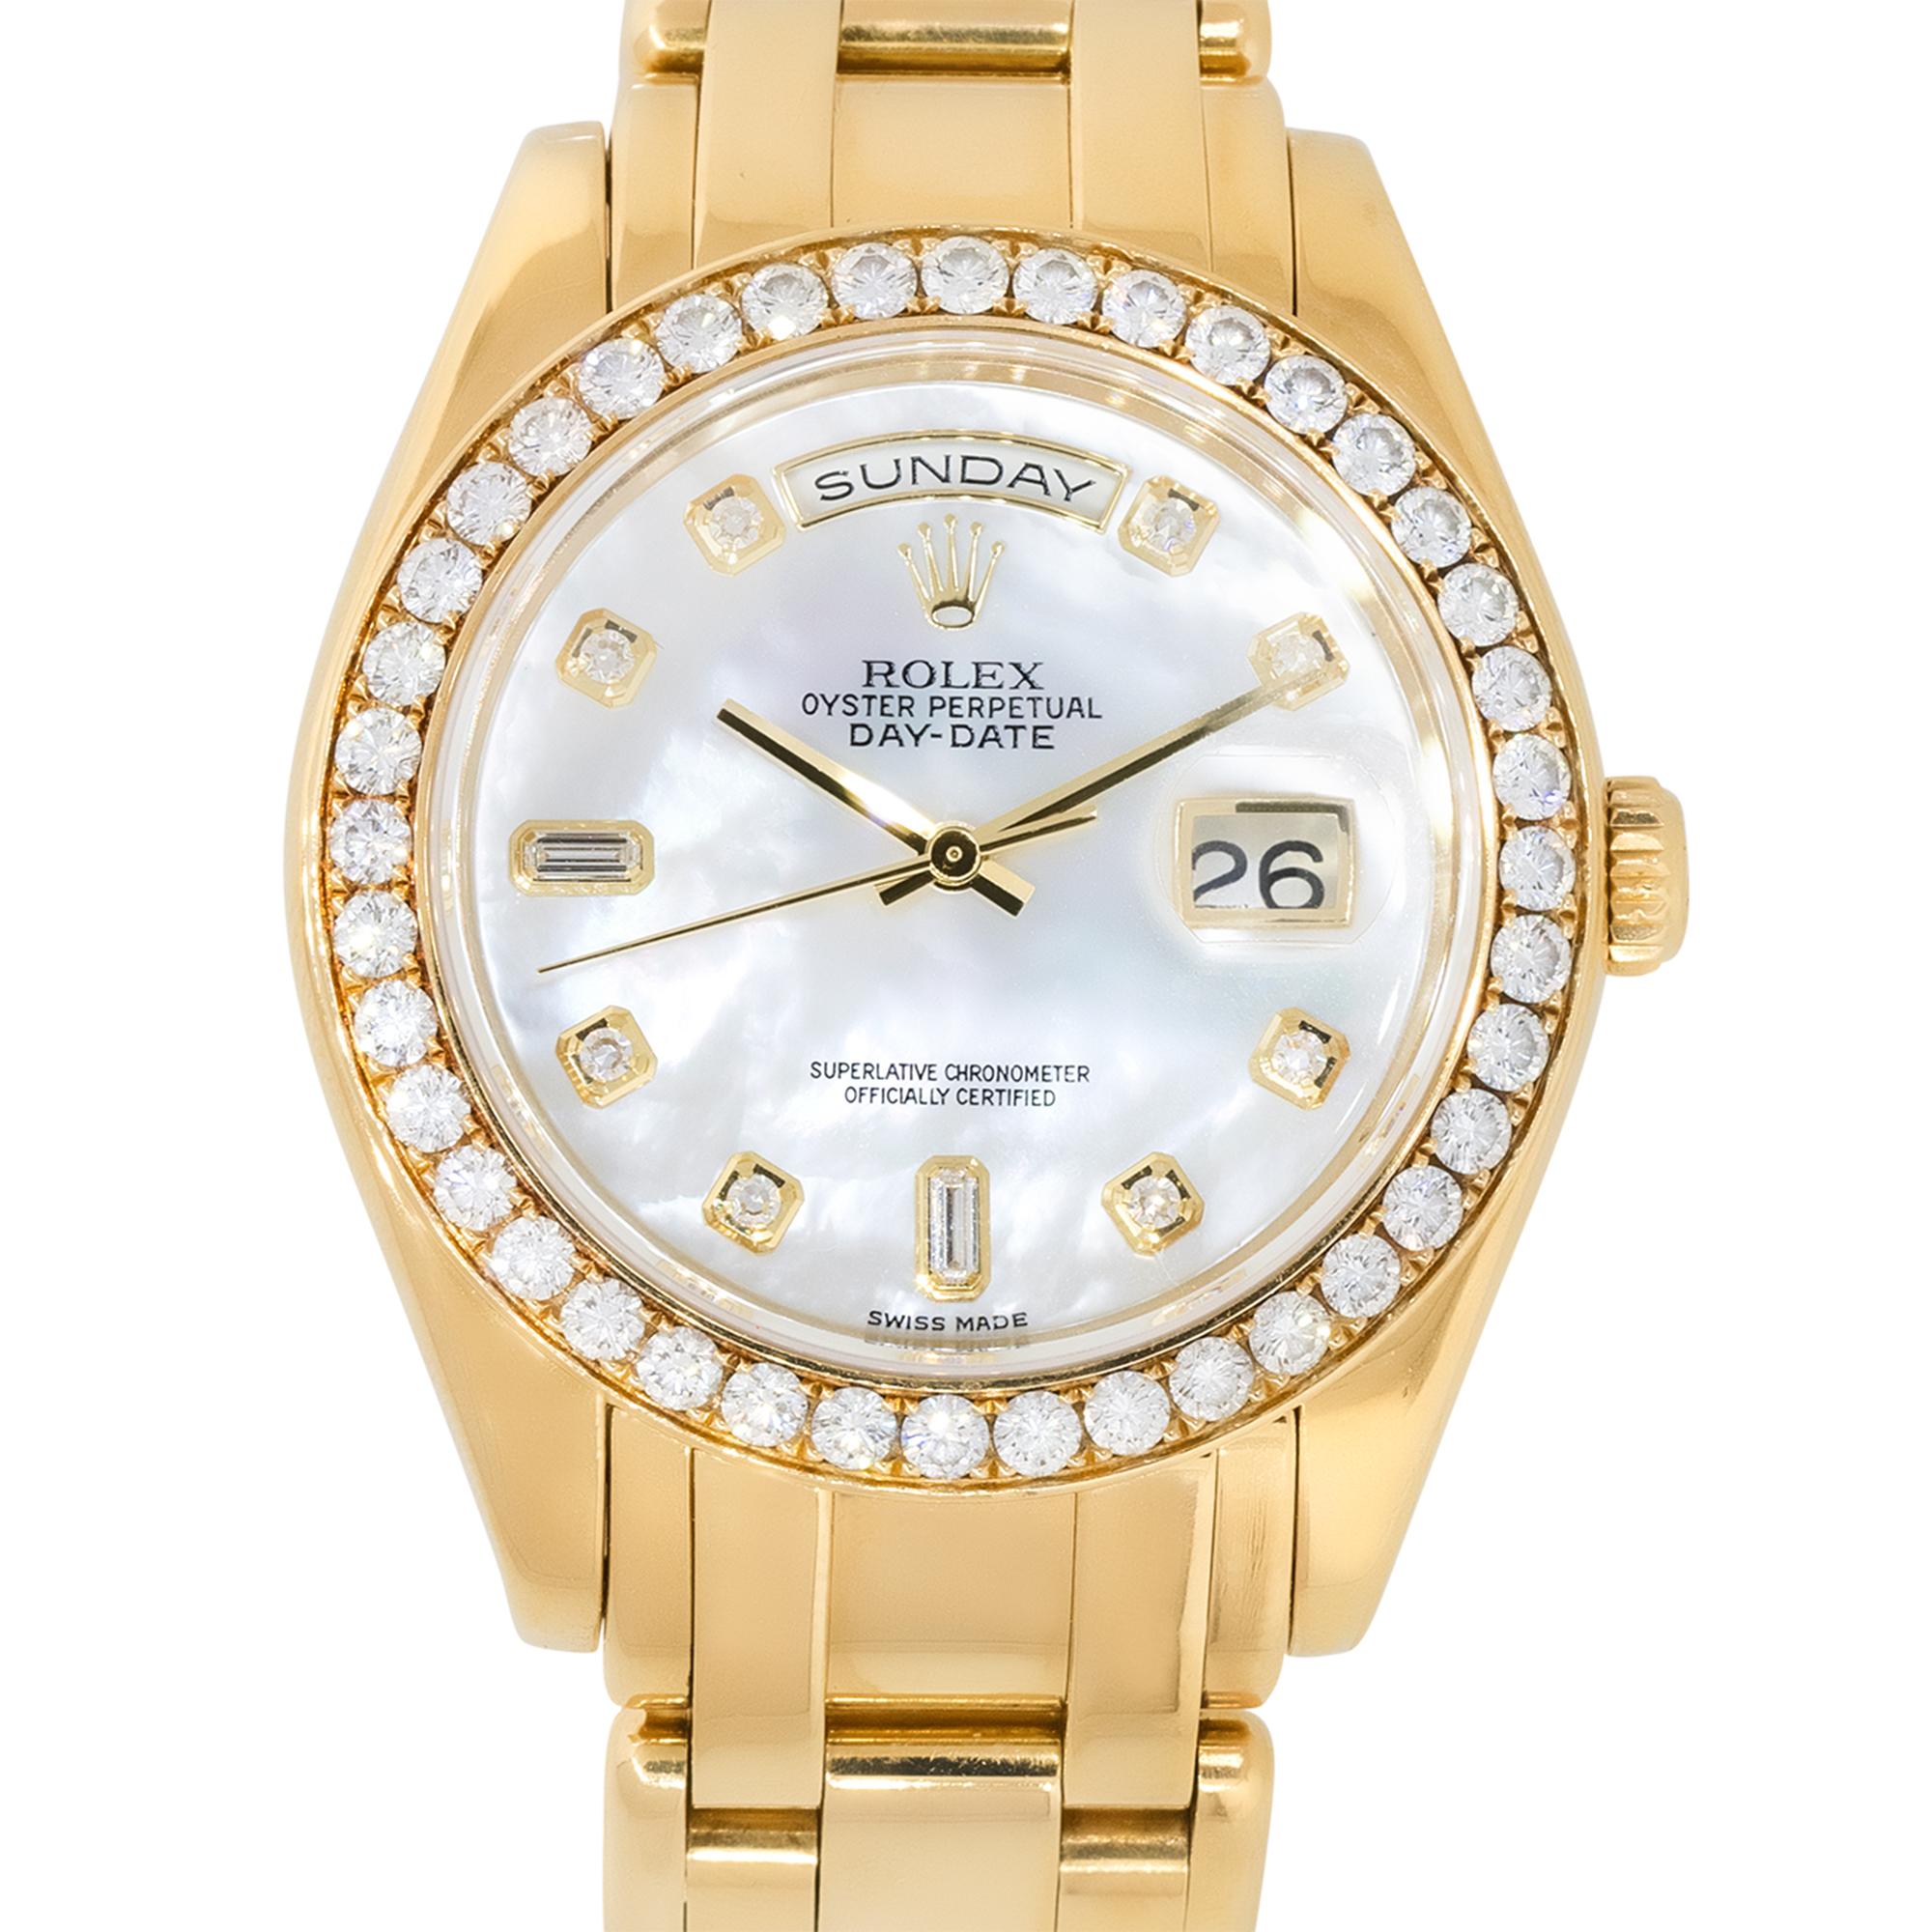 Brand: Rolex
Case Material: 18k Yellow Gold
Case Diameter: 39mm
Crystal: Sapphire Crystal
Bezel: 18k Yellow Gold bezel with Diamonds
Dial: Mother of pearl Dial with yellow gold hands and Diamond hour markers. Date can be found at 3 o'clock as well